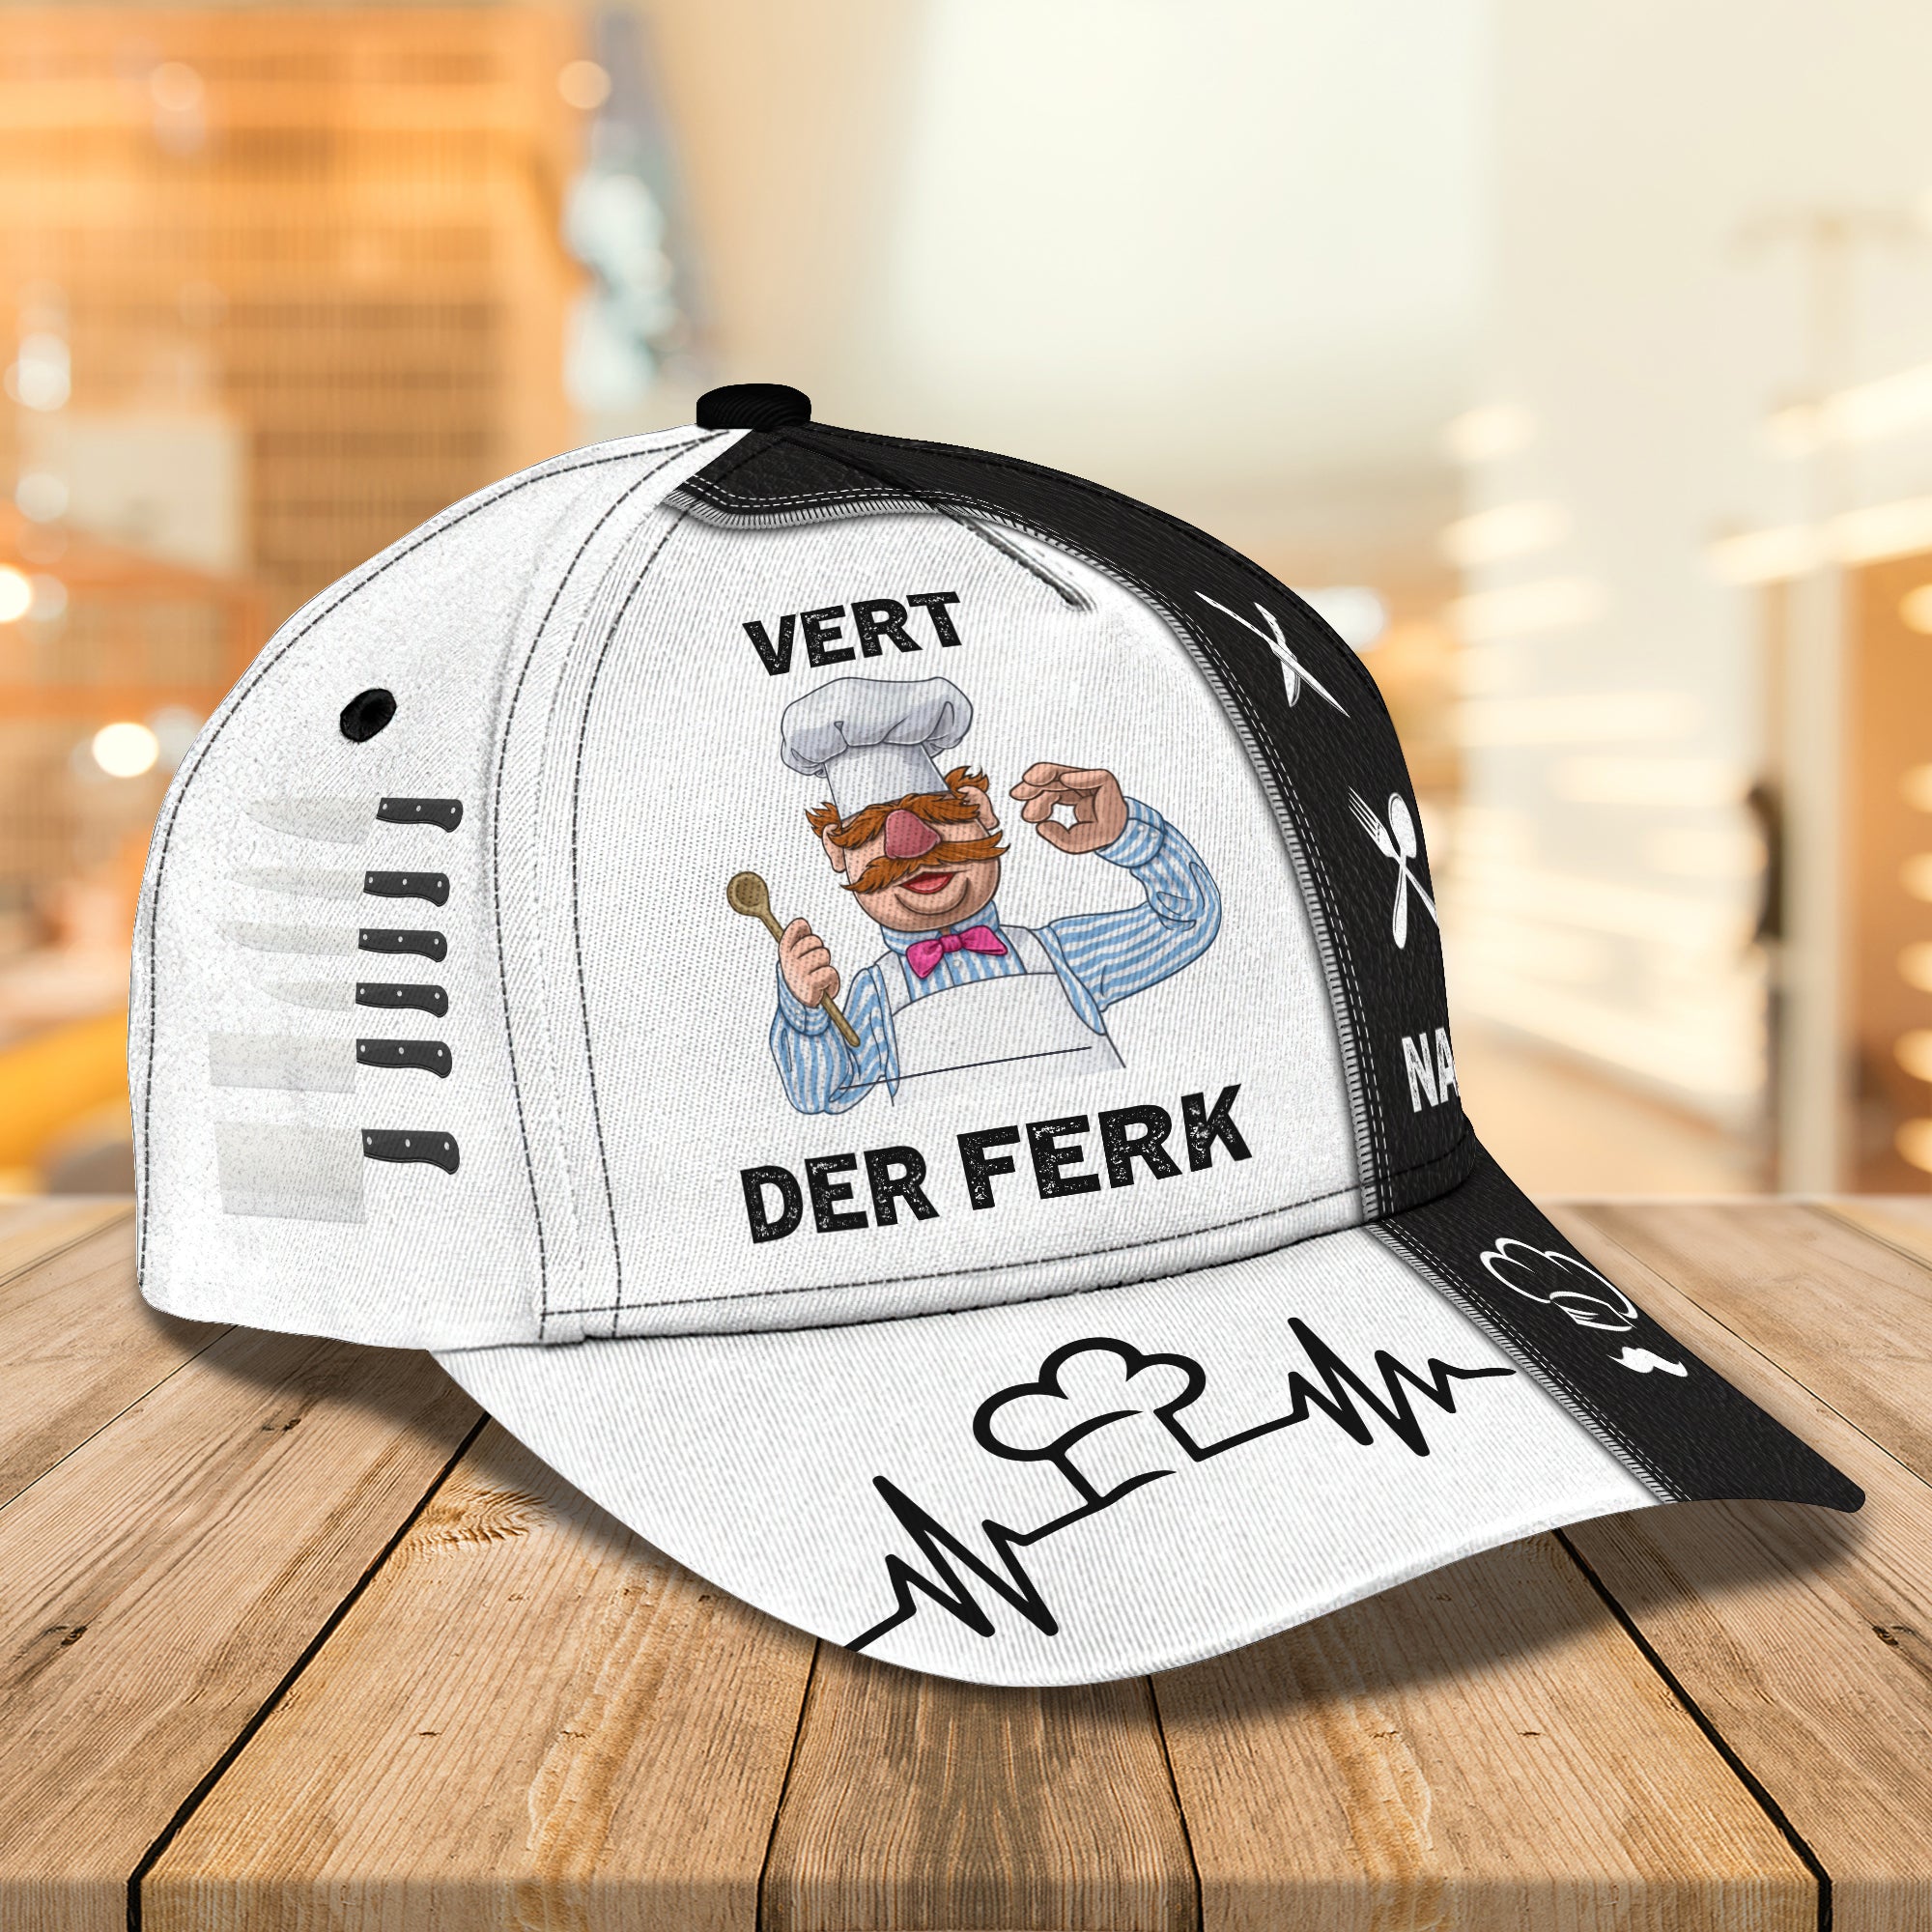 Chef 004 - Personalized Name Cap - 16hb